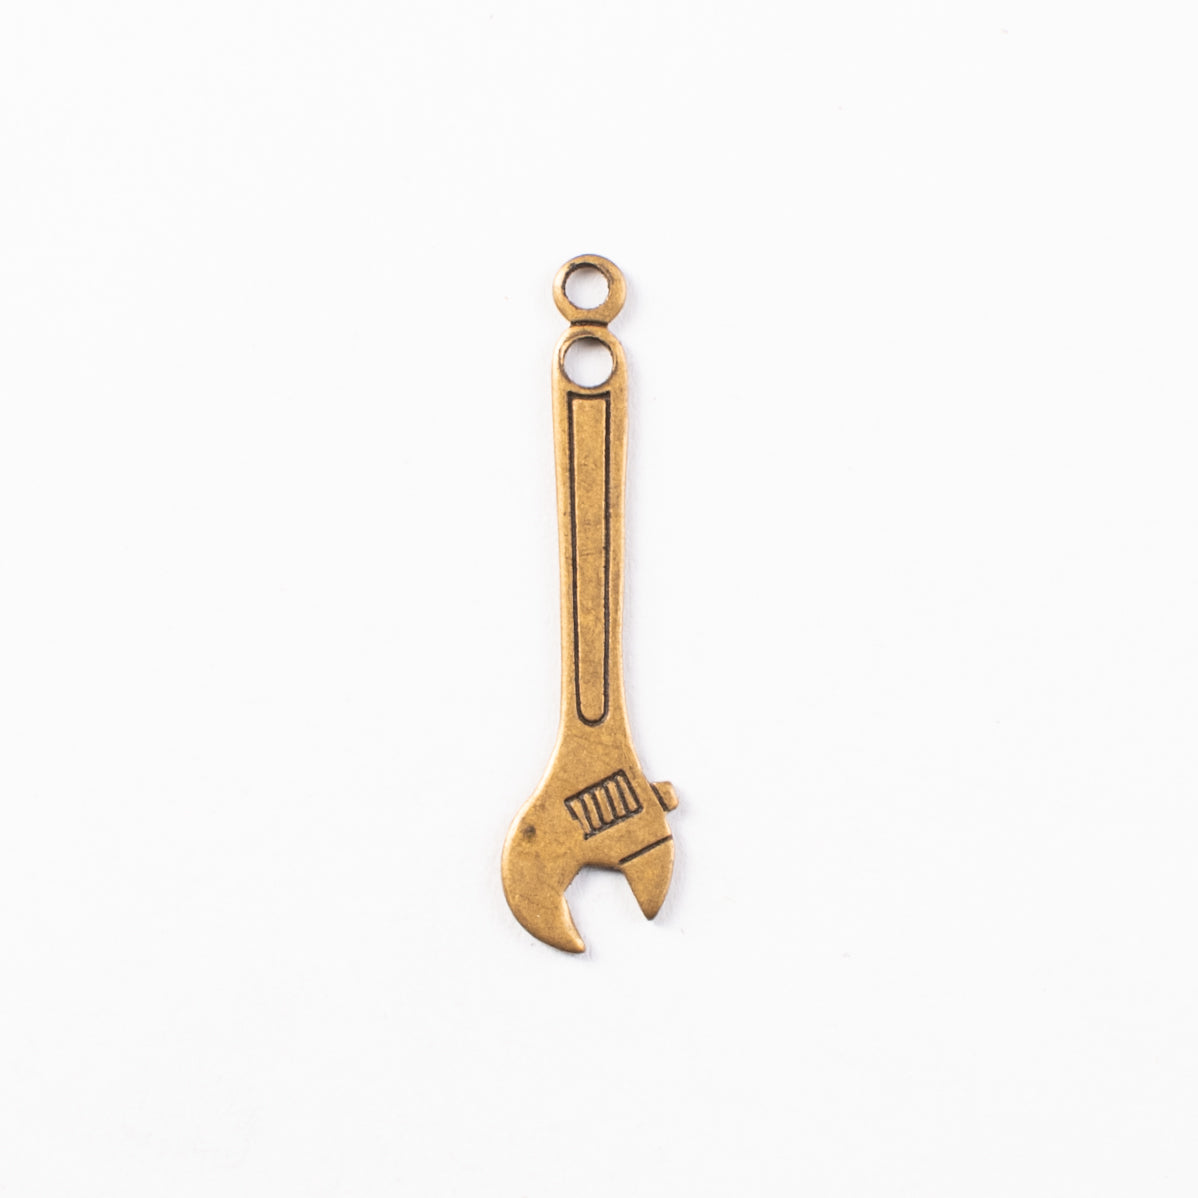 32mm Wrench Charm, Antique Gold, Classic Silver, pk/6